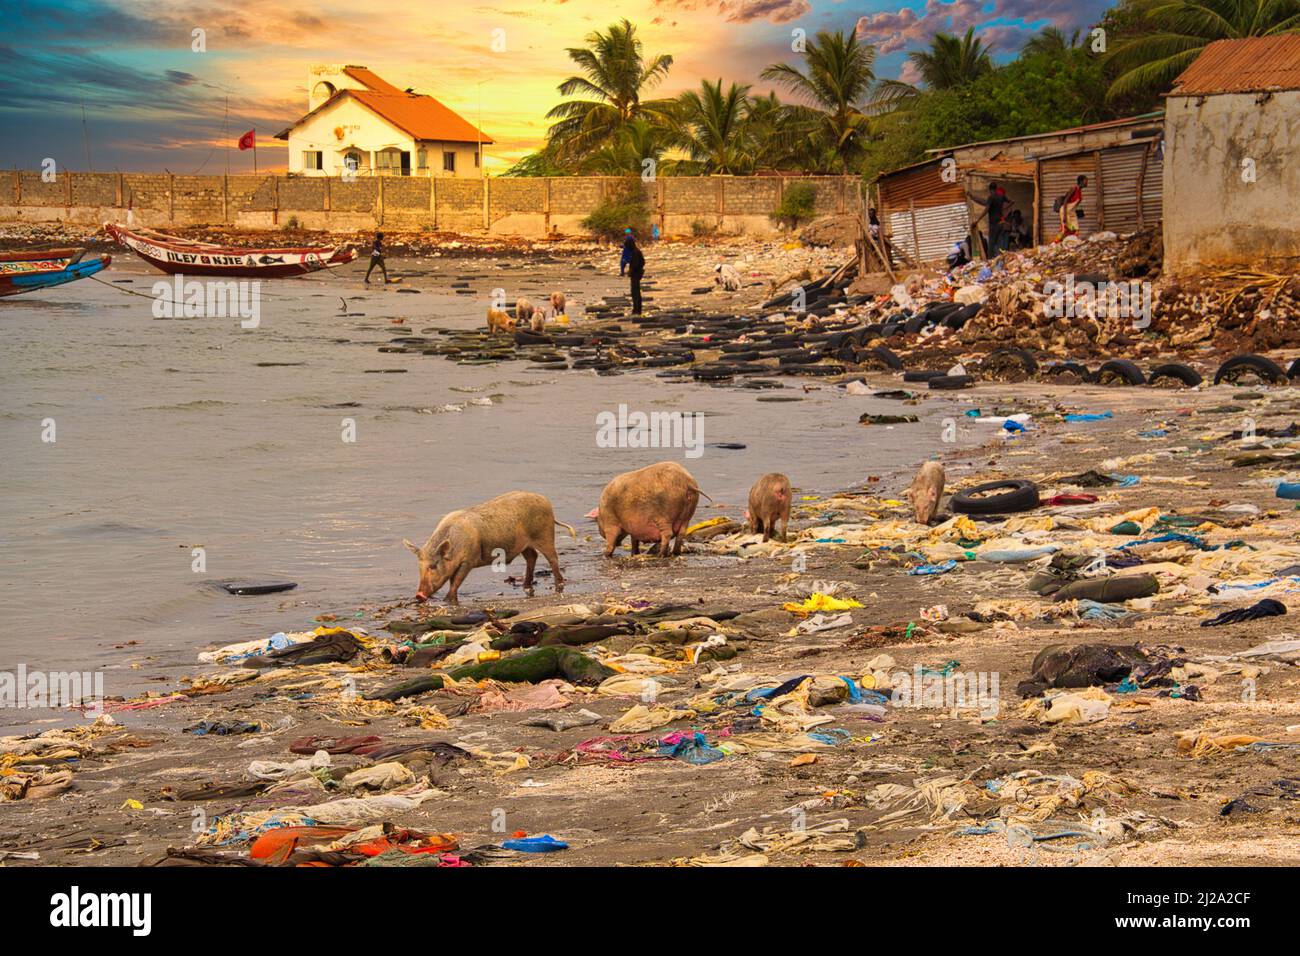 WARANG, MBOUR, SENEGAL - Circa JANUARY 20222. Beach sand of atlantic ocean with so many garbage plastic pollution in Senegal Africa. Pigs eating plast Stock Photo